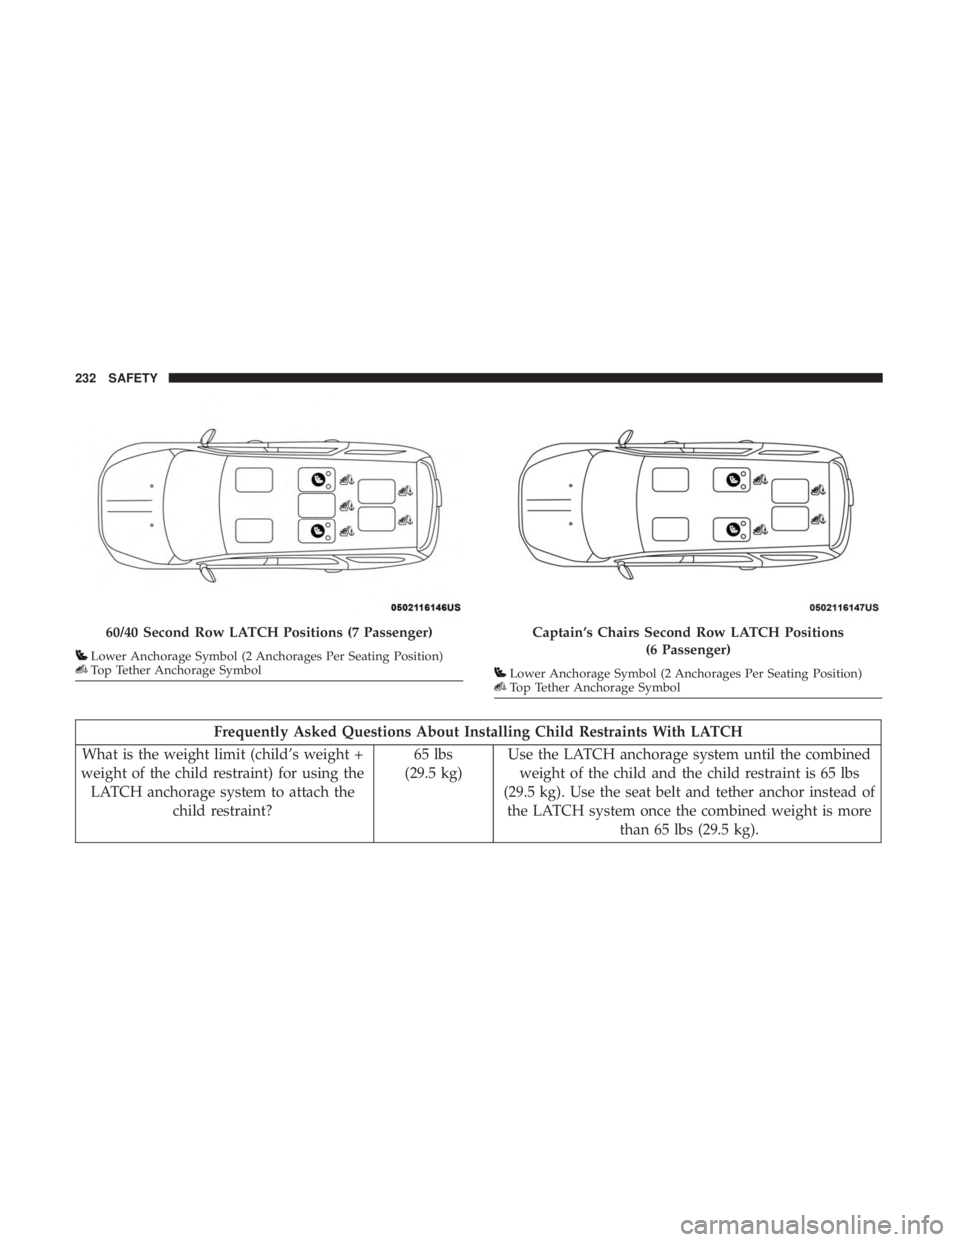 DODGE DURANGO SRT 2019  Owners Manual Frequently Asked Questions About Installing Child Restraints With LATCH
What is the weight limit (child’s weight +
weight of the child restraint) for using the LATCH anchorage system to attach the c